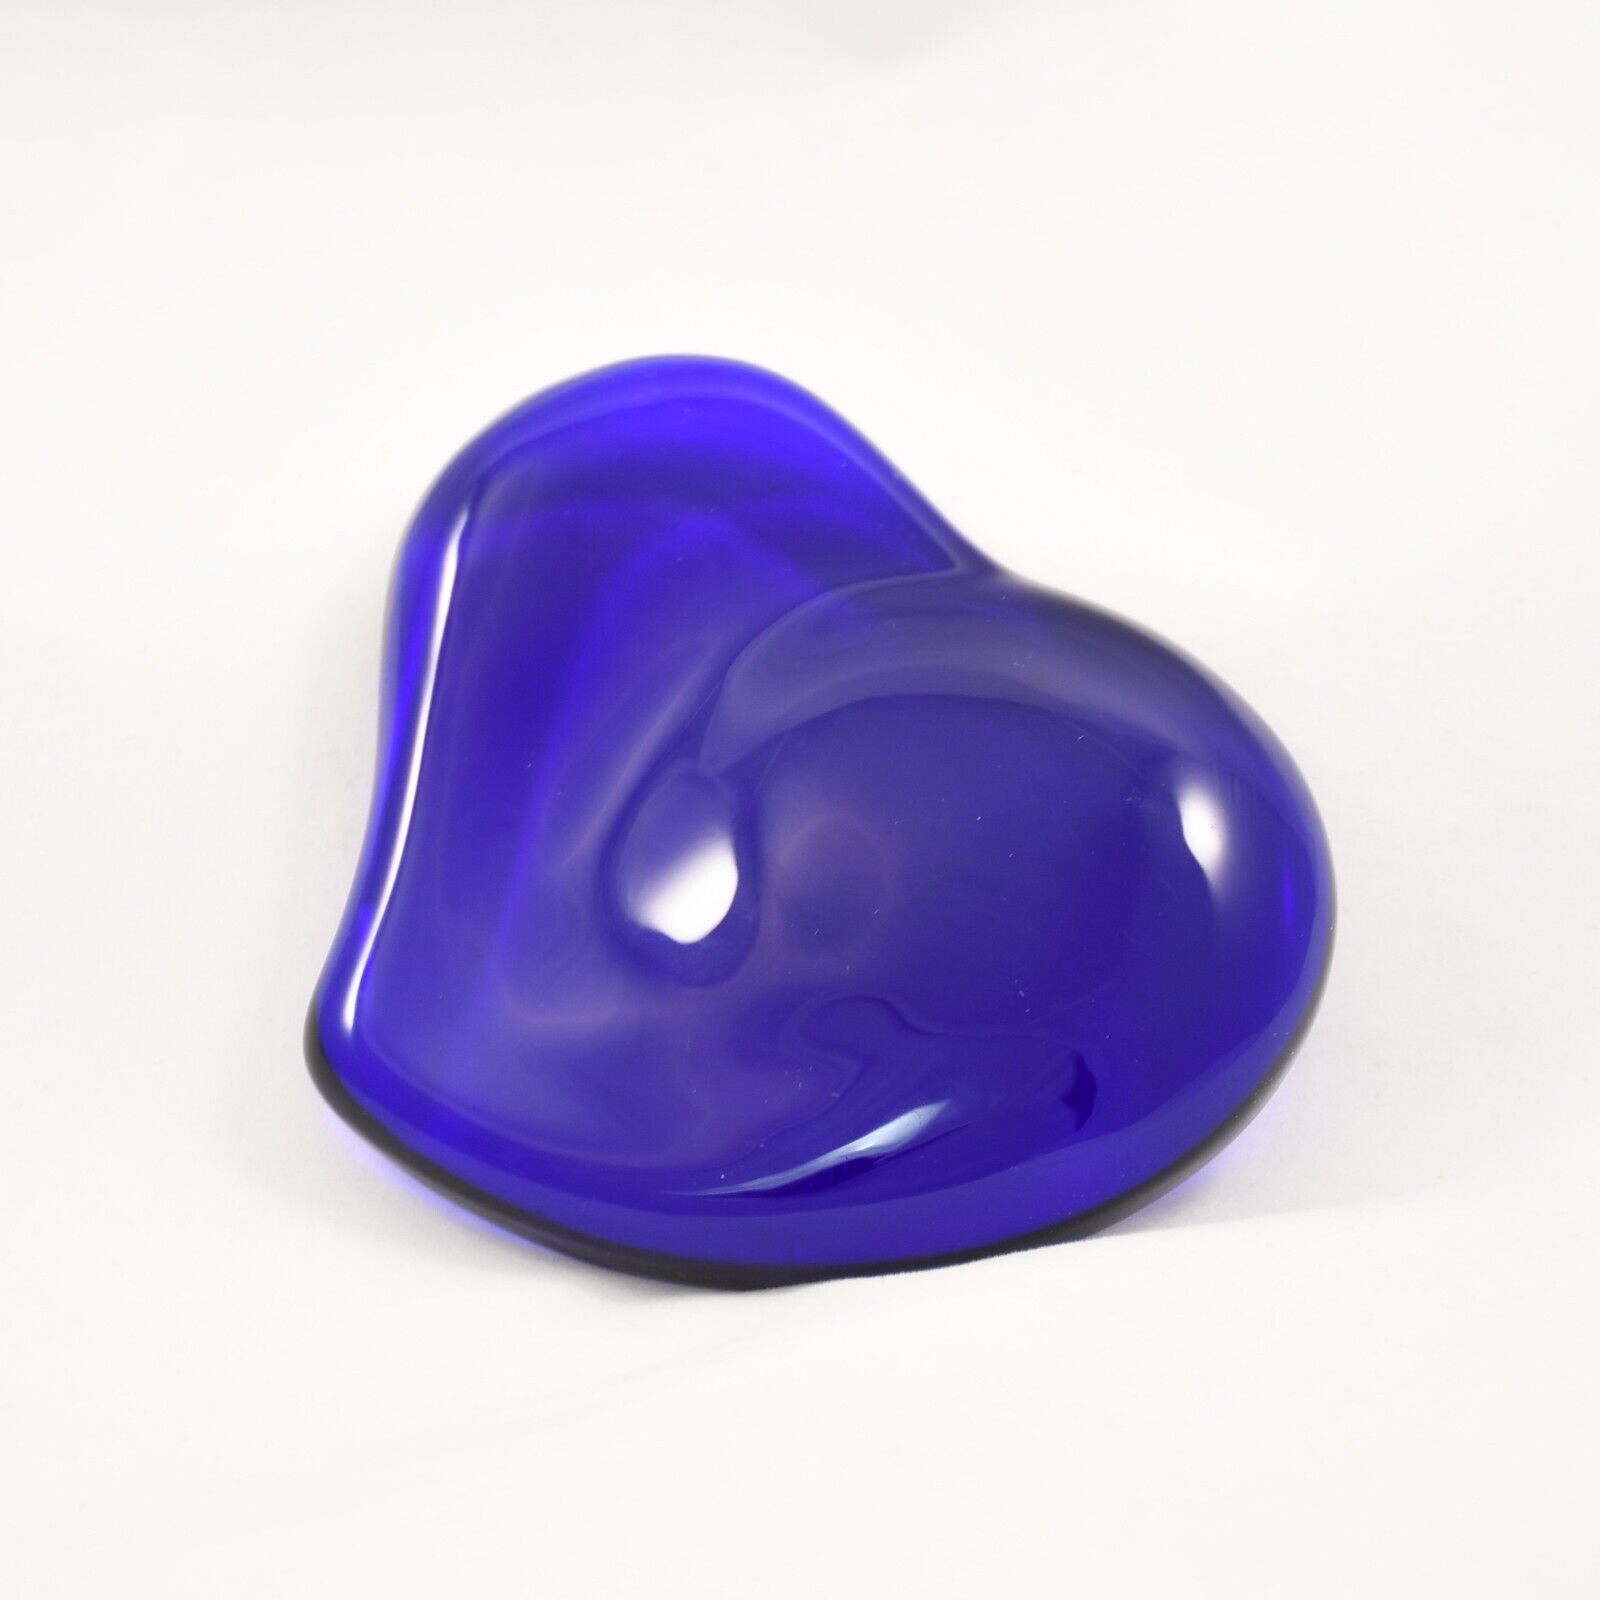 TIFFANY & CO. Cobalt Blue Glass Heart Paperweight Signed Elsa Peretti 4 in. Gift